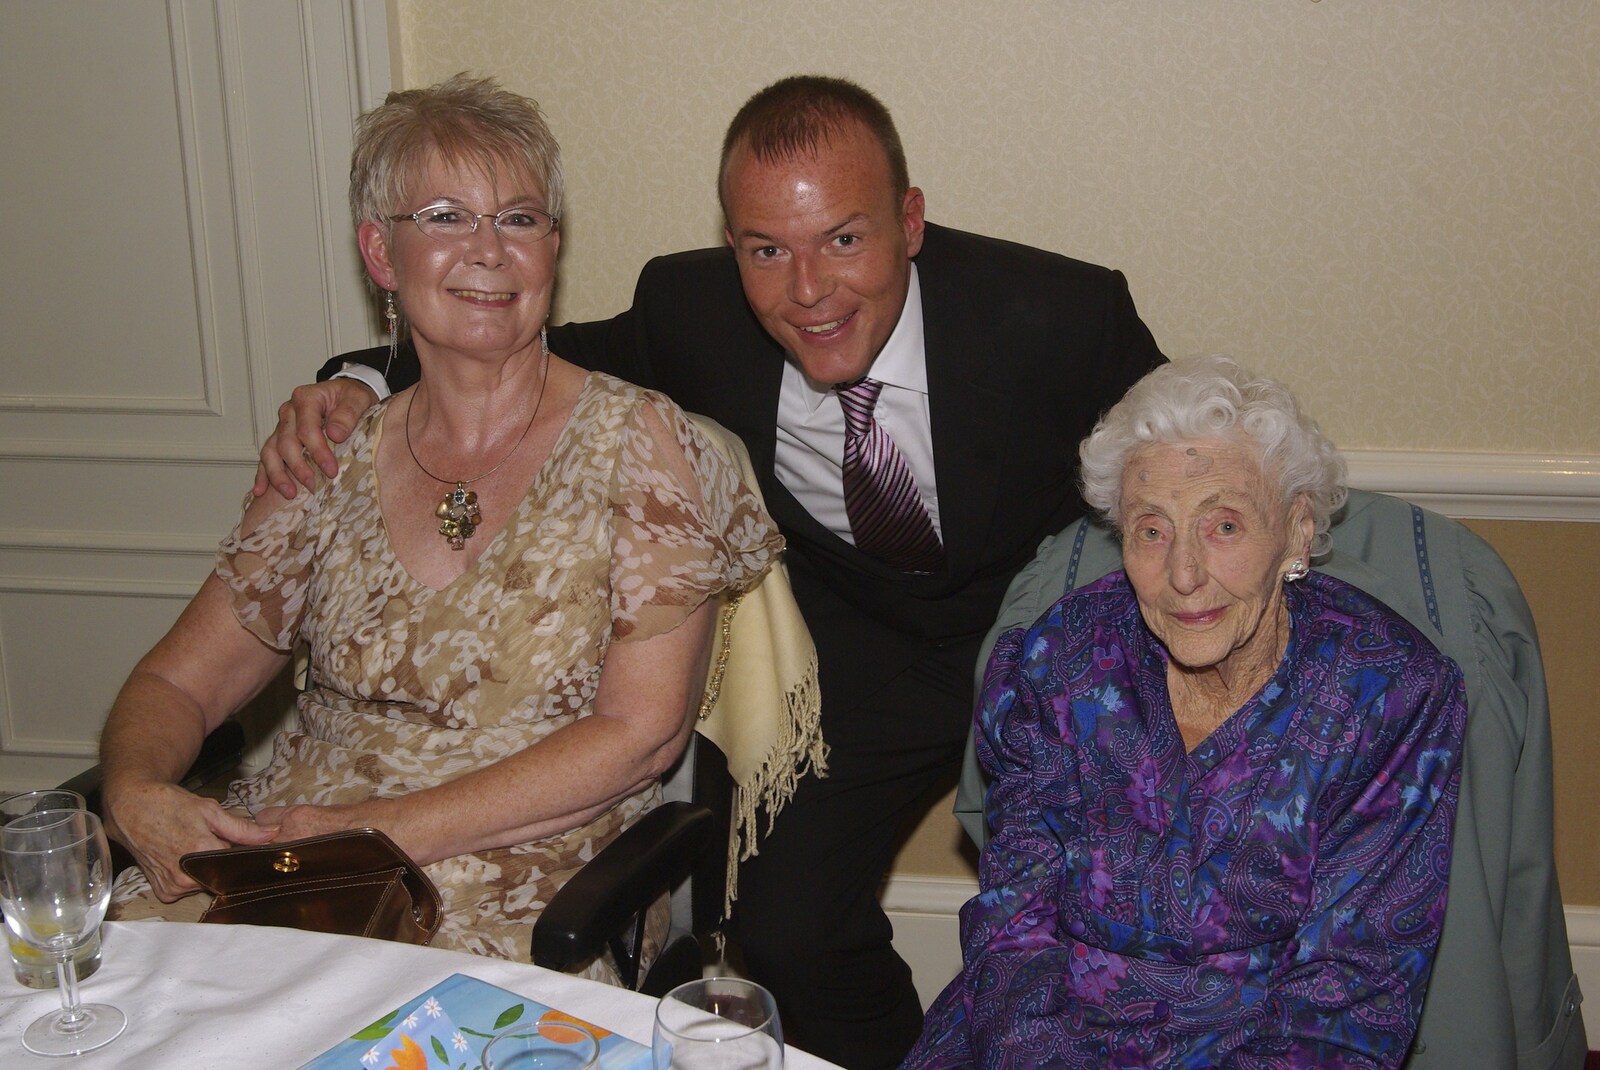 Matt's Wedding Reception, and a BSCC Presentation, Brome, Solihull and Stratford upon Avon - 6th October 2007: Matt, with his mum and gran